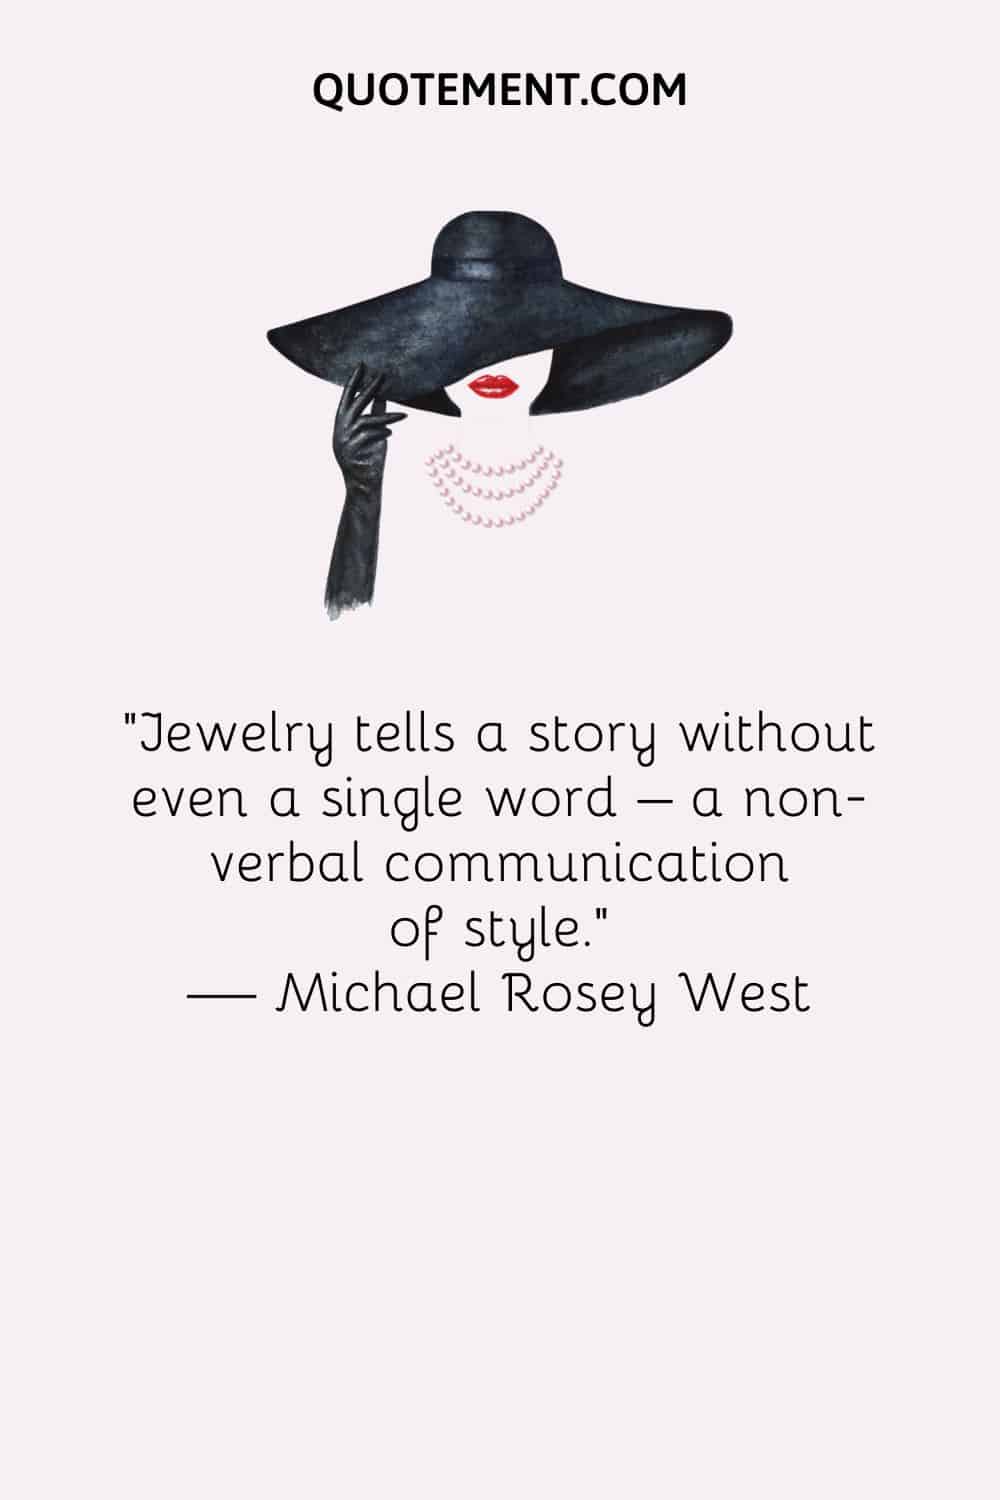 Jewelry tells a story without even a single word – a non-verbal communication of style